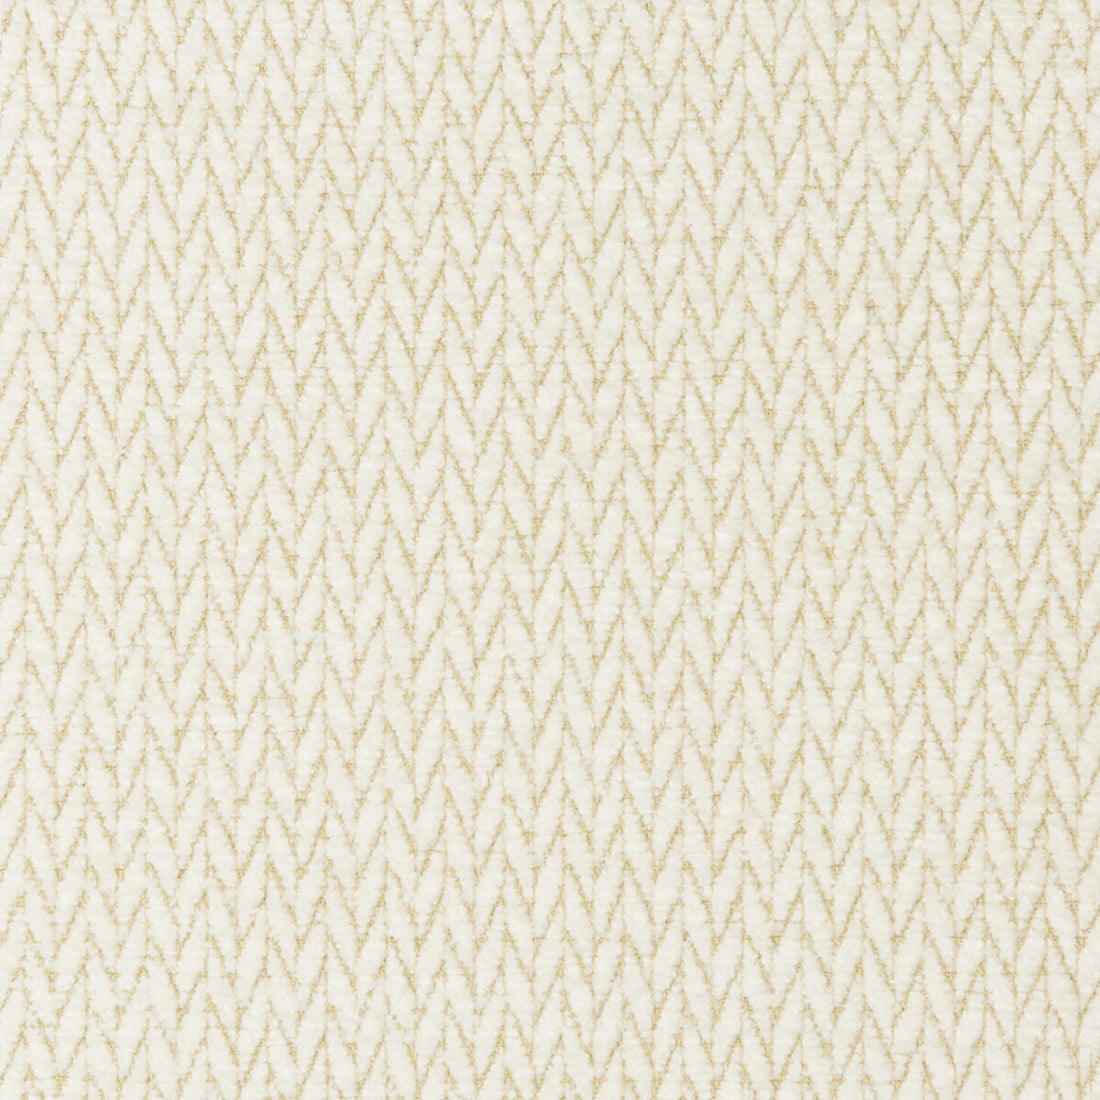 Cassien Texture fabric in ivory color - pattern 8019146.1.0 - by Brunschwig &amp; Fils in the Chambery Textures II collection